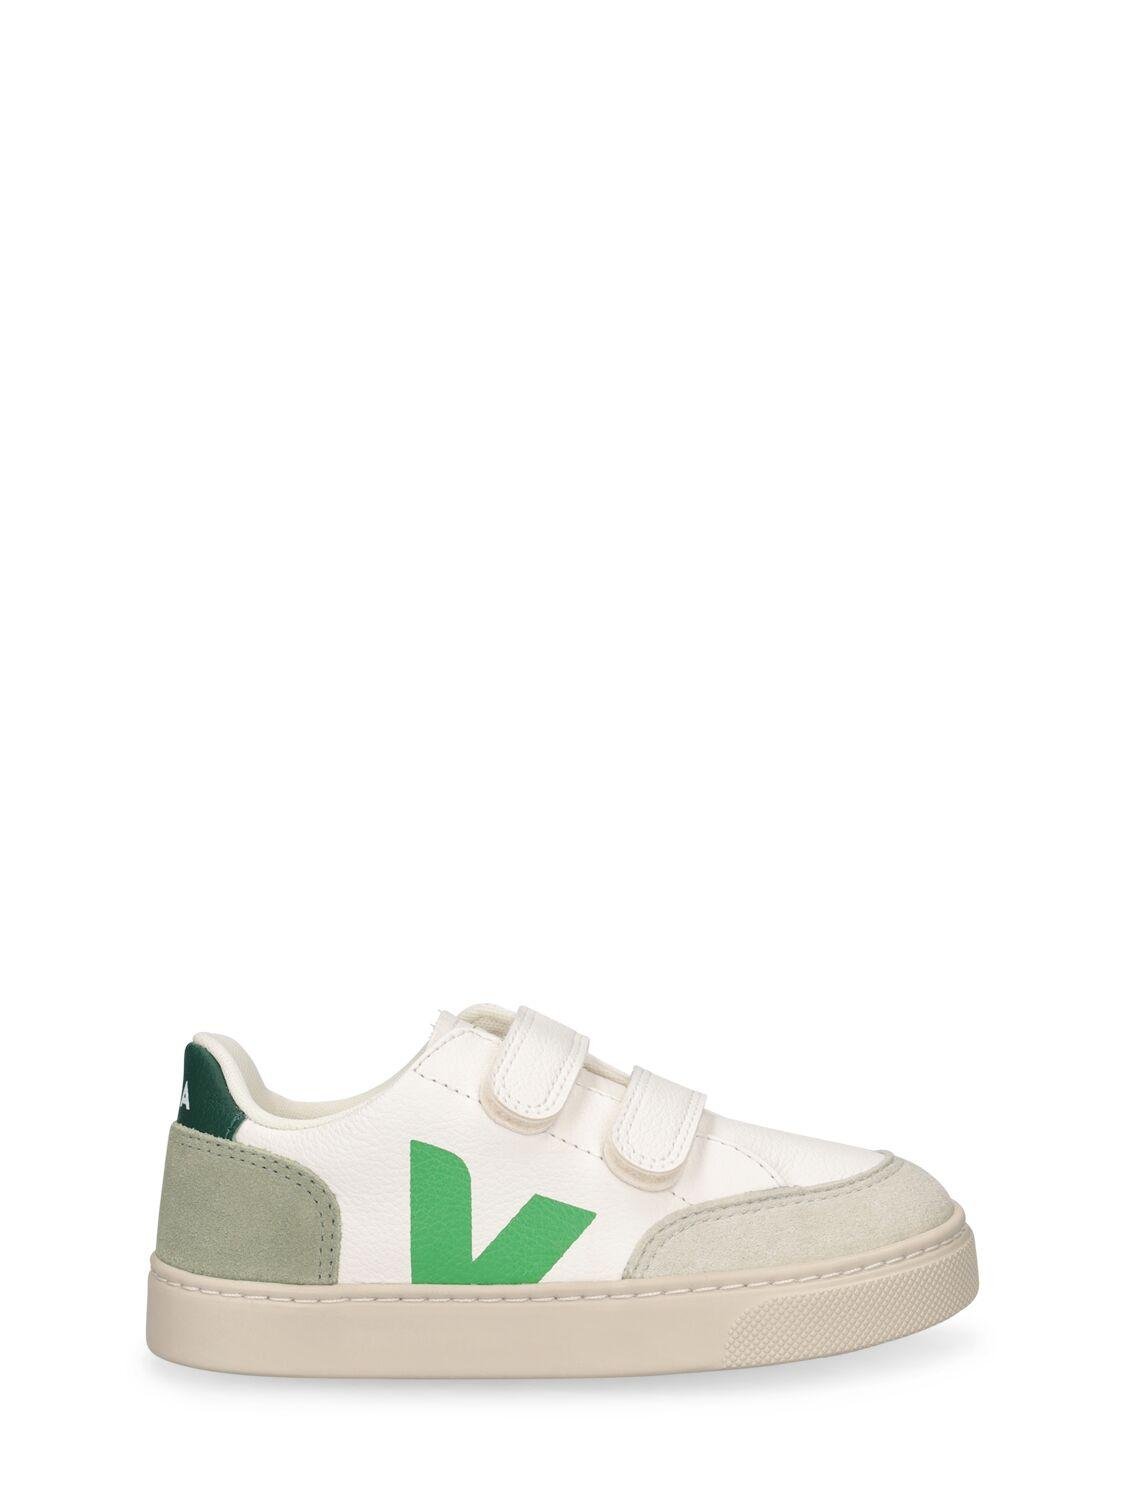 V-12 Chrome-free Leather Sneakers by VEJA